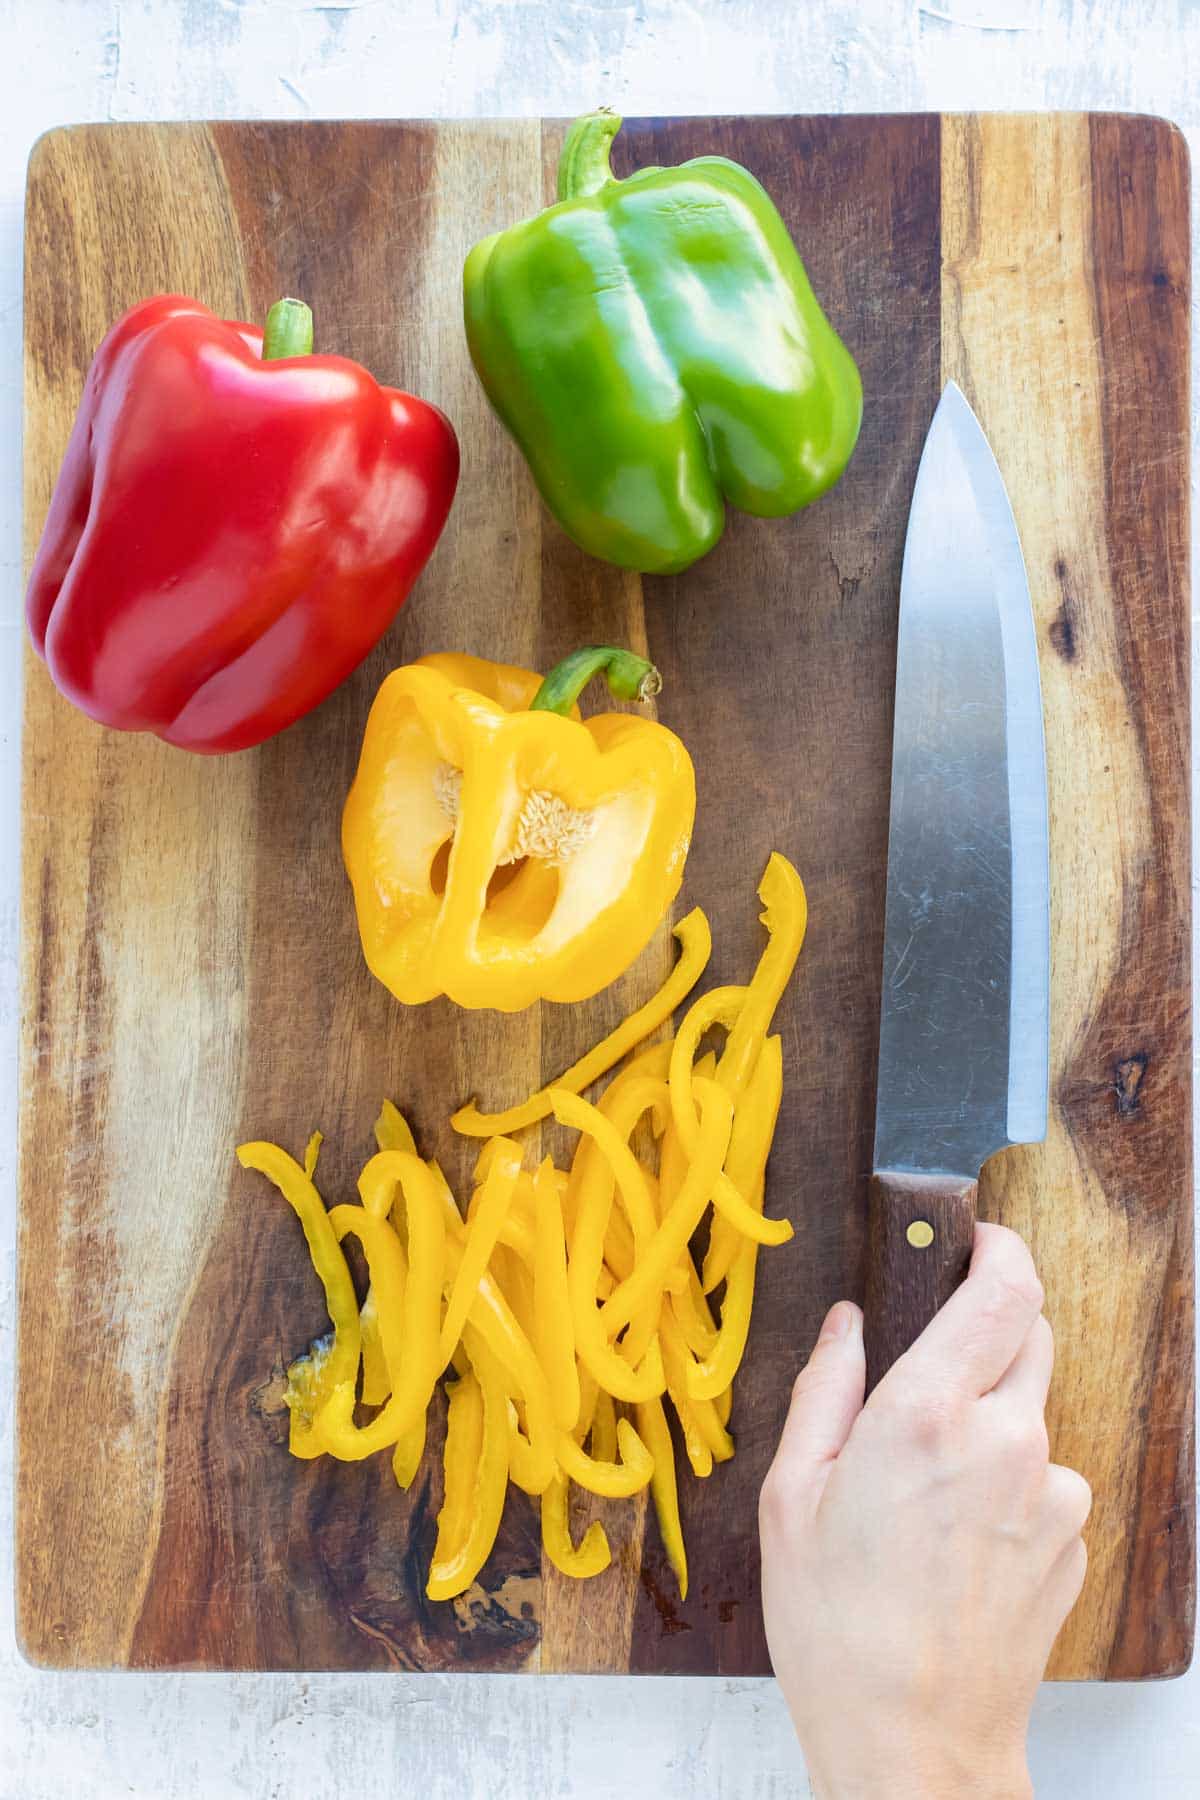 A red, yellow, and green bell pepper on a wooden cutting board being thinly sliced.